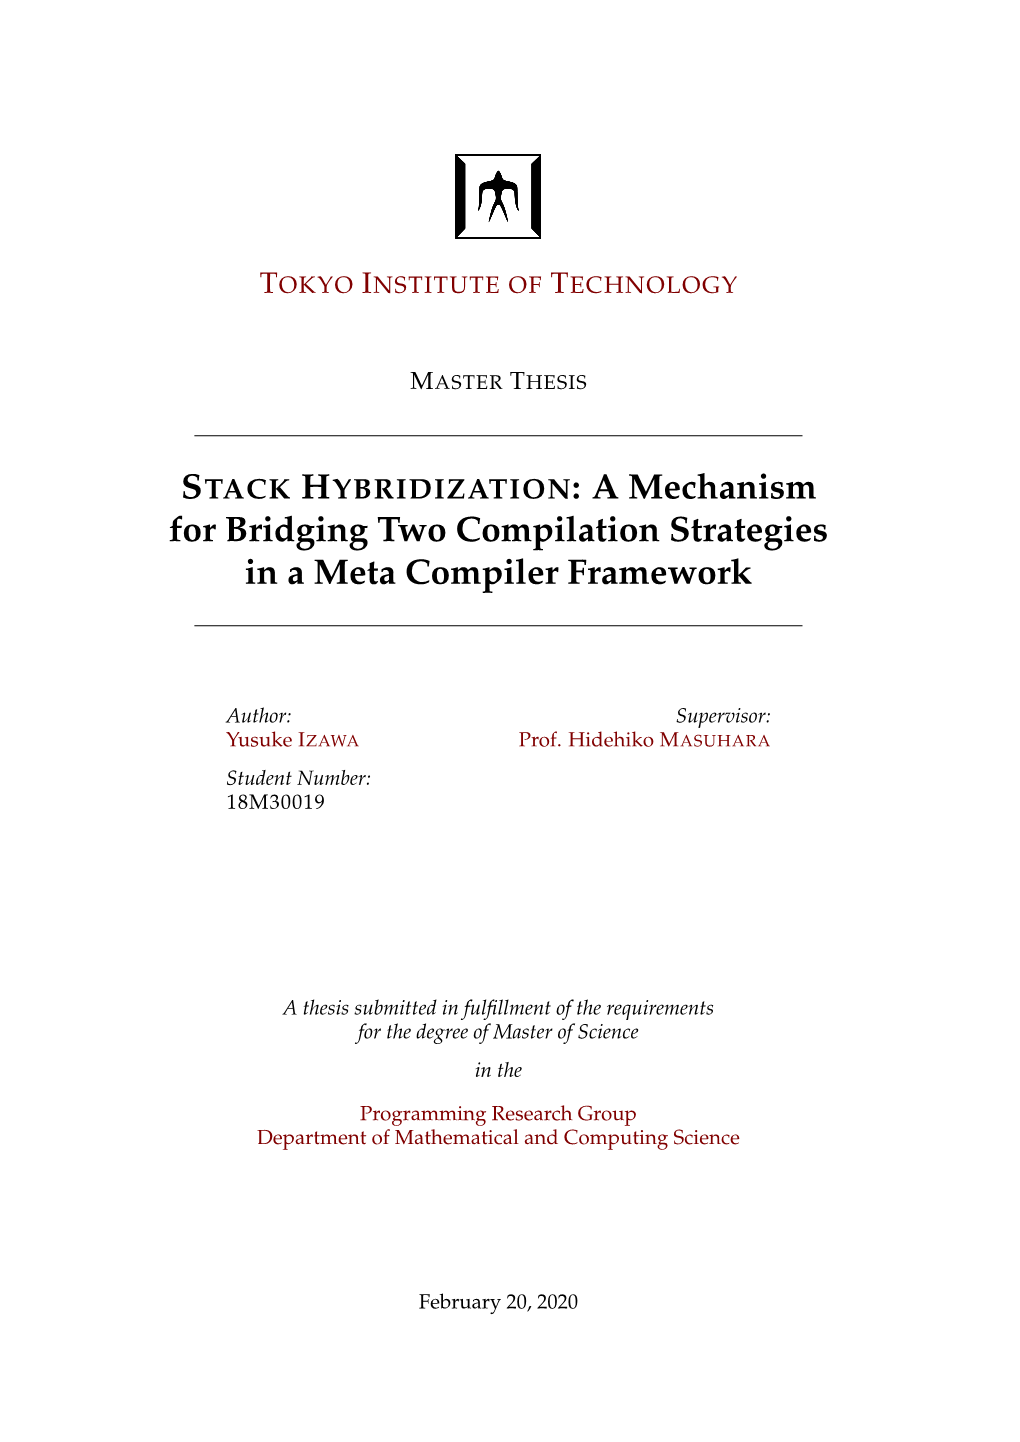 STACK HYBRIDIZATION: a Mechanism for Bridging Two Compilation Strategies in a Meta Compiler Framework